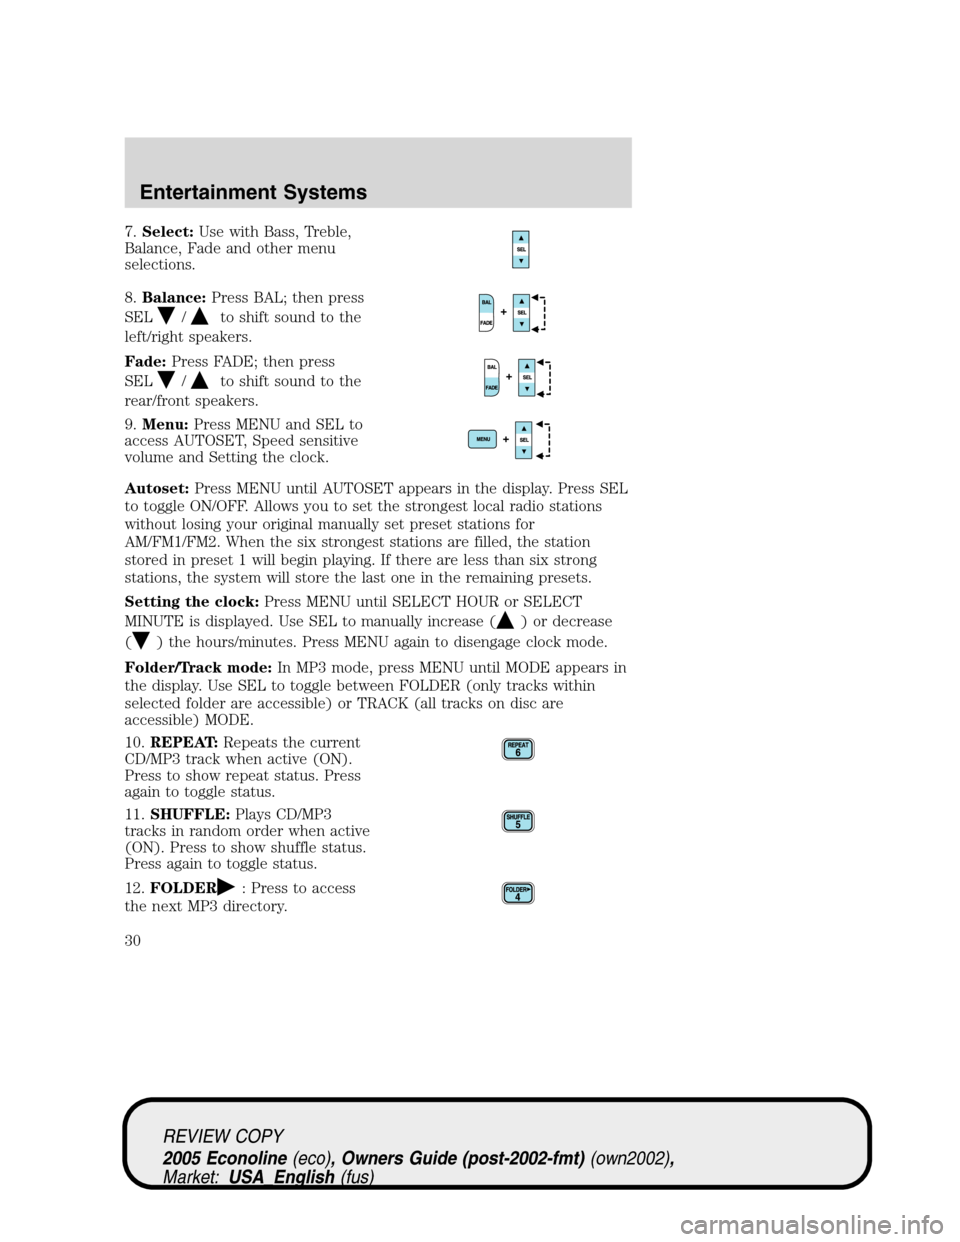 FORD E SERIES 2005 4.G Owners Manual 7.Select:Use with Bass, Treble,
Balance, Fade and other menu
selections.
8.Balance:Press BAL; then press
SEL
/to shift sound to the
left/right speakers.
Fade:Press FADE; then press
SEL
/to shift sound